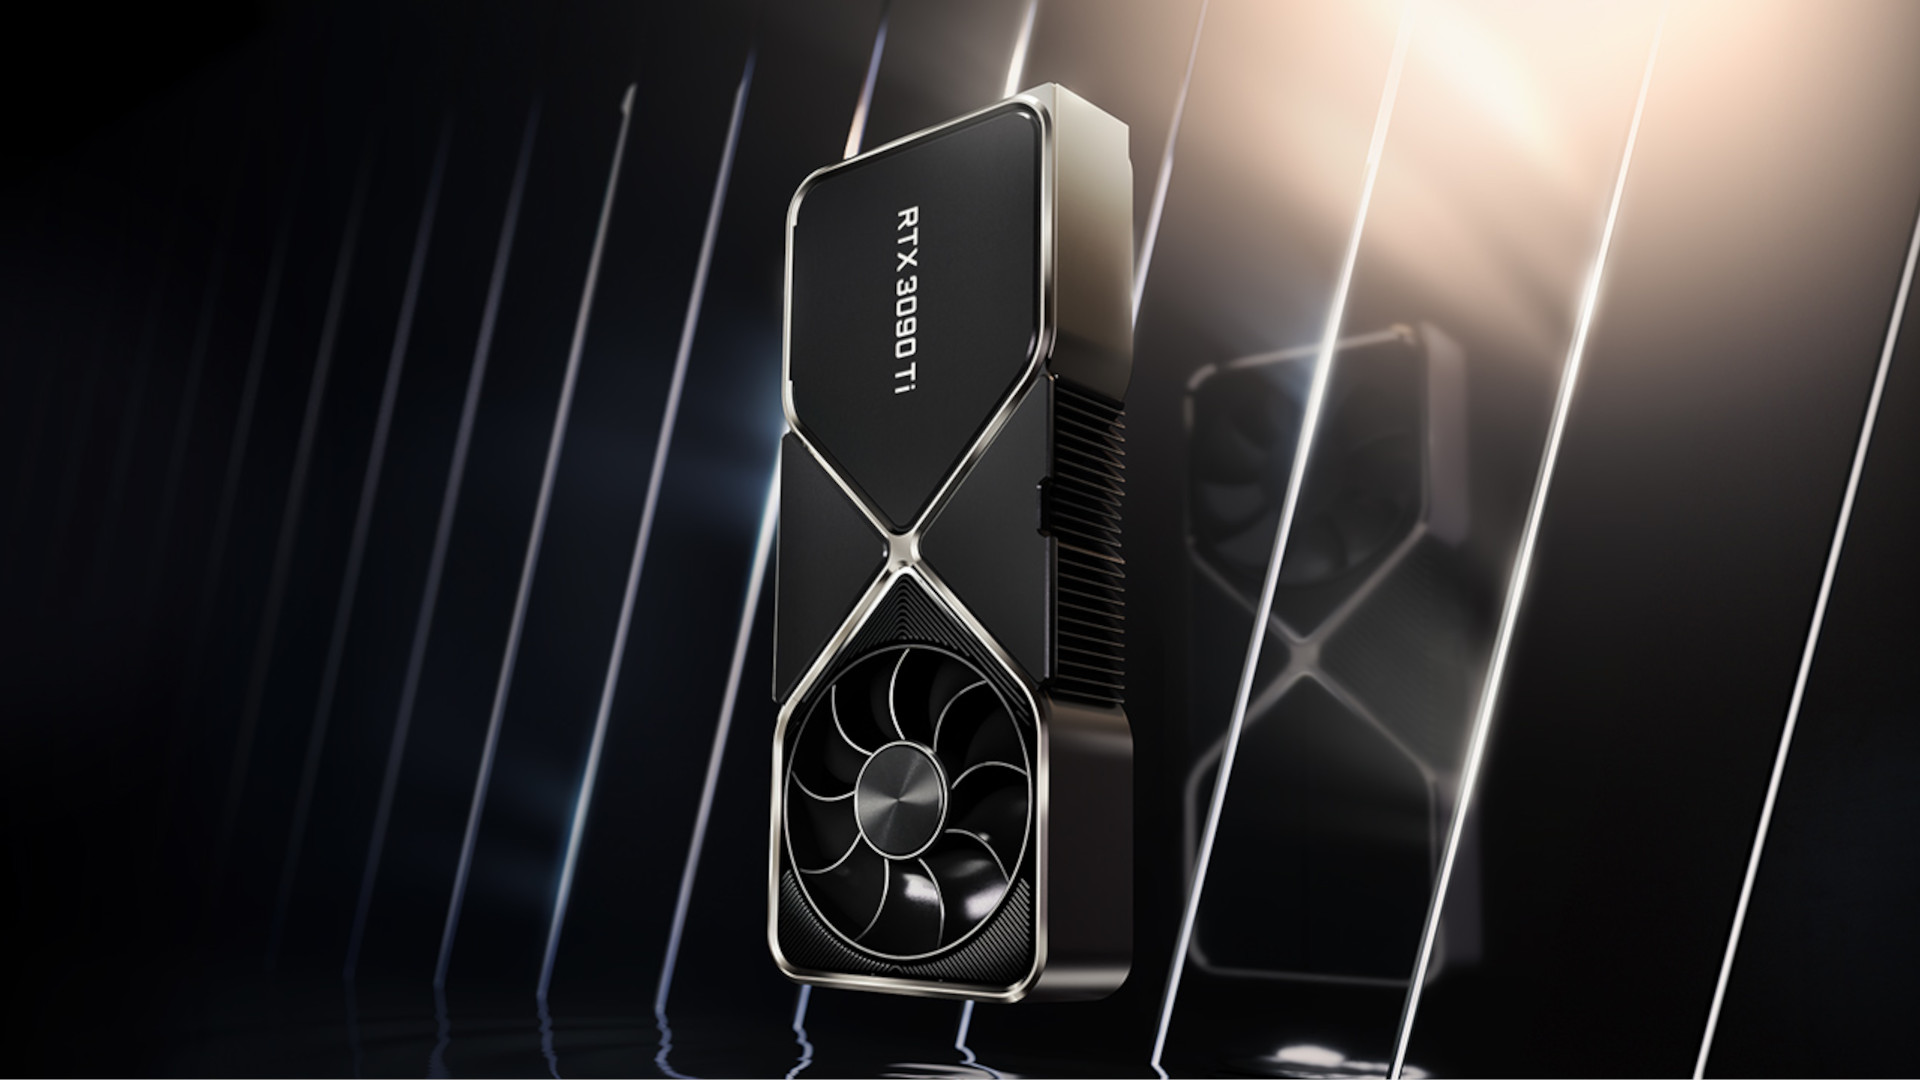 Nvidia GeForce RTX 3090 Ti price may permanently fall by 20%